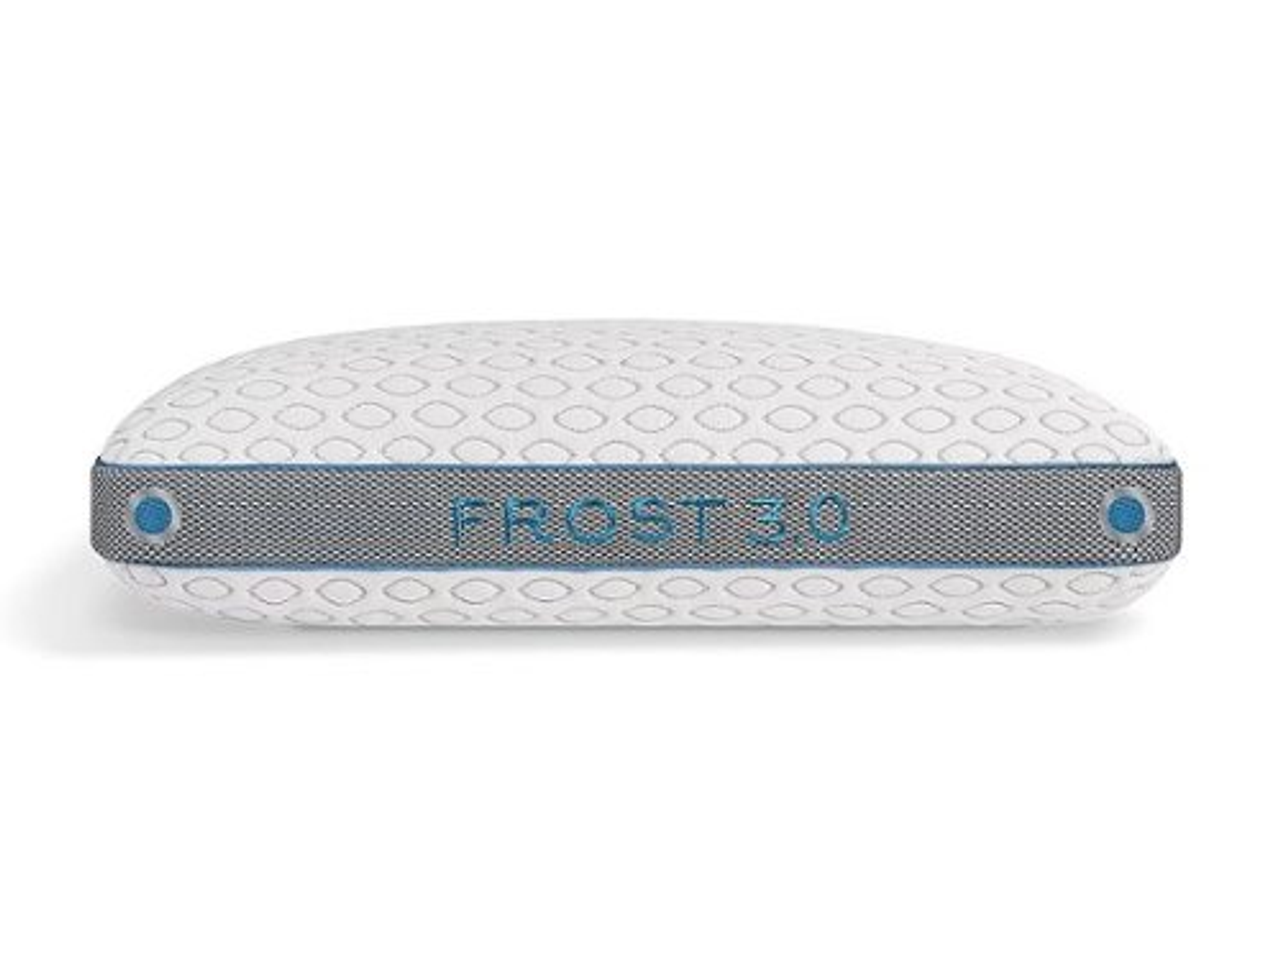 Bedgear - Frost Performance Pillow 3.0 - White